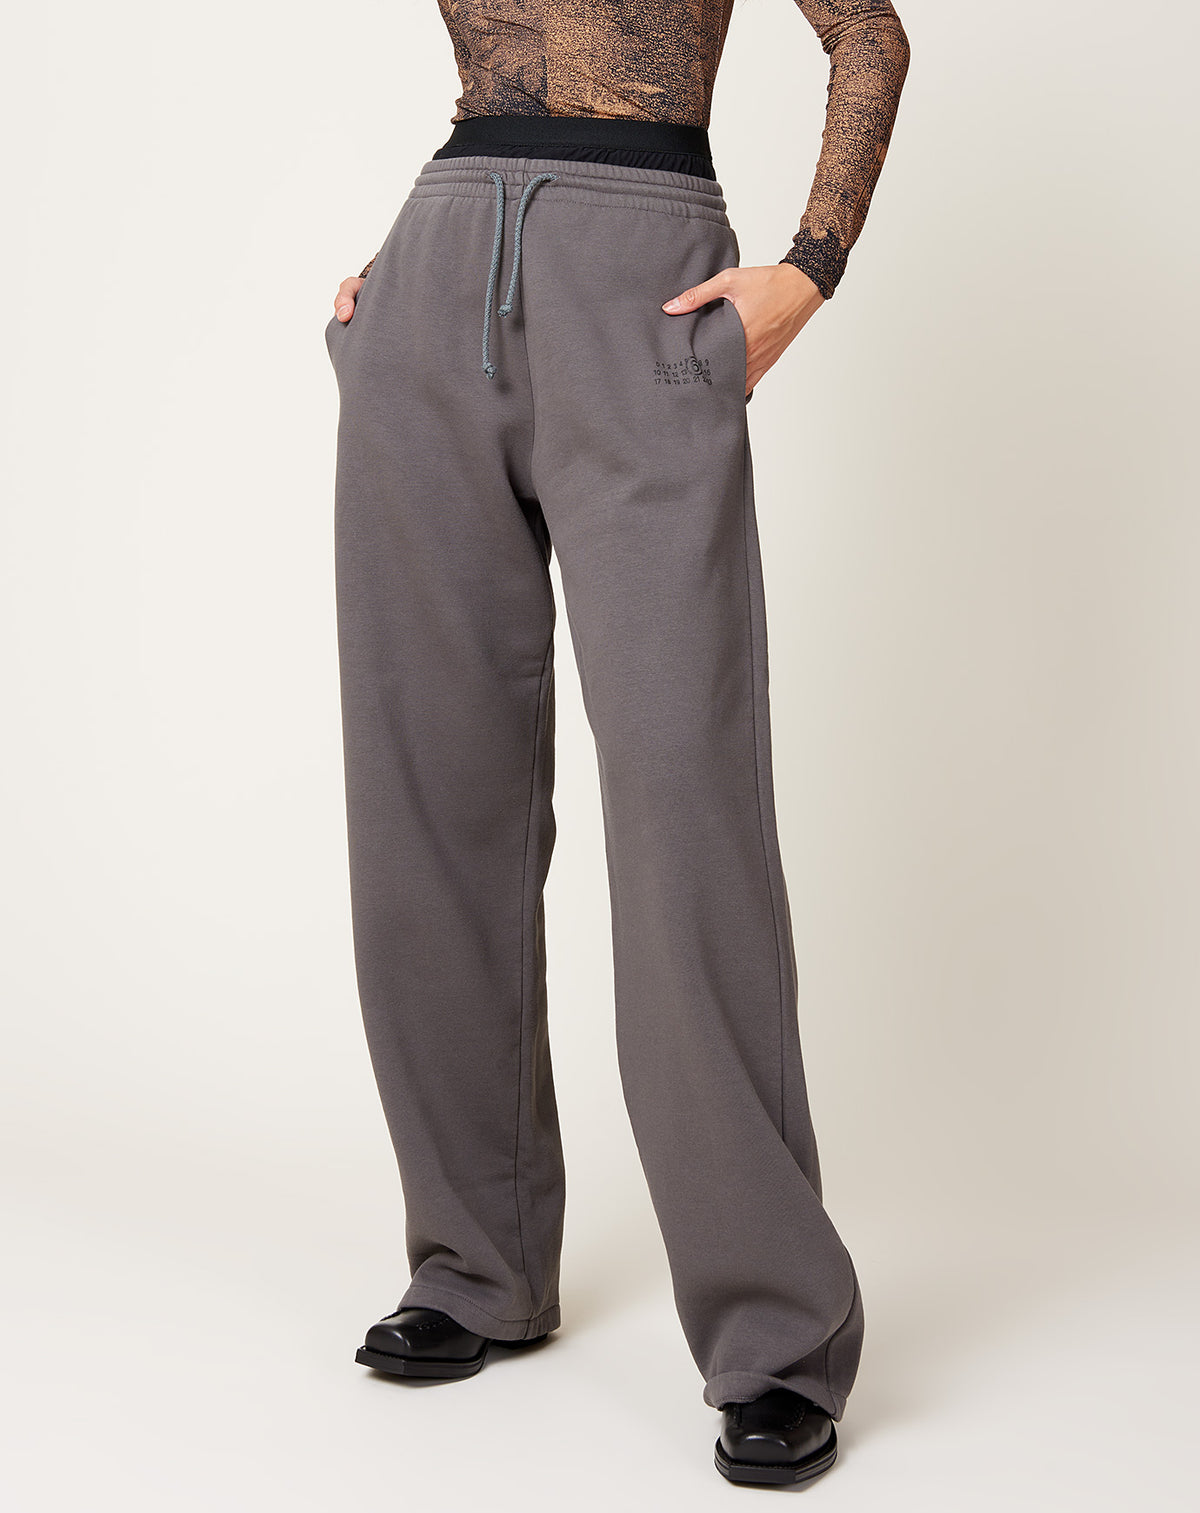 Double Layer Straight Leg Sweatpant in Grey, MM6